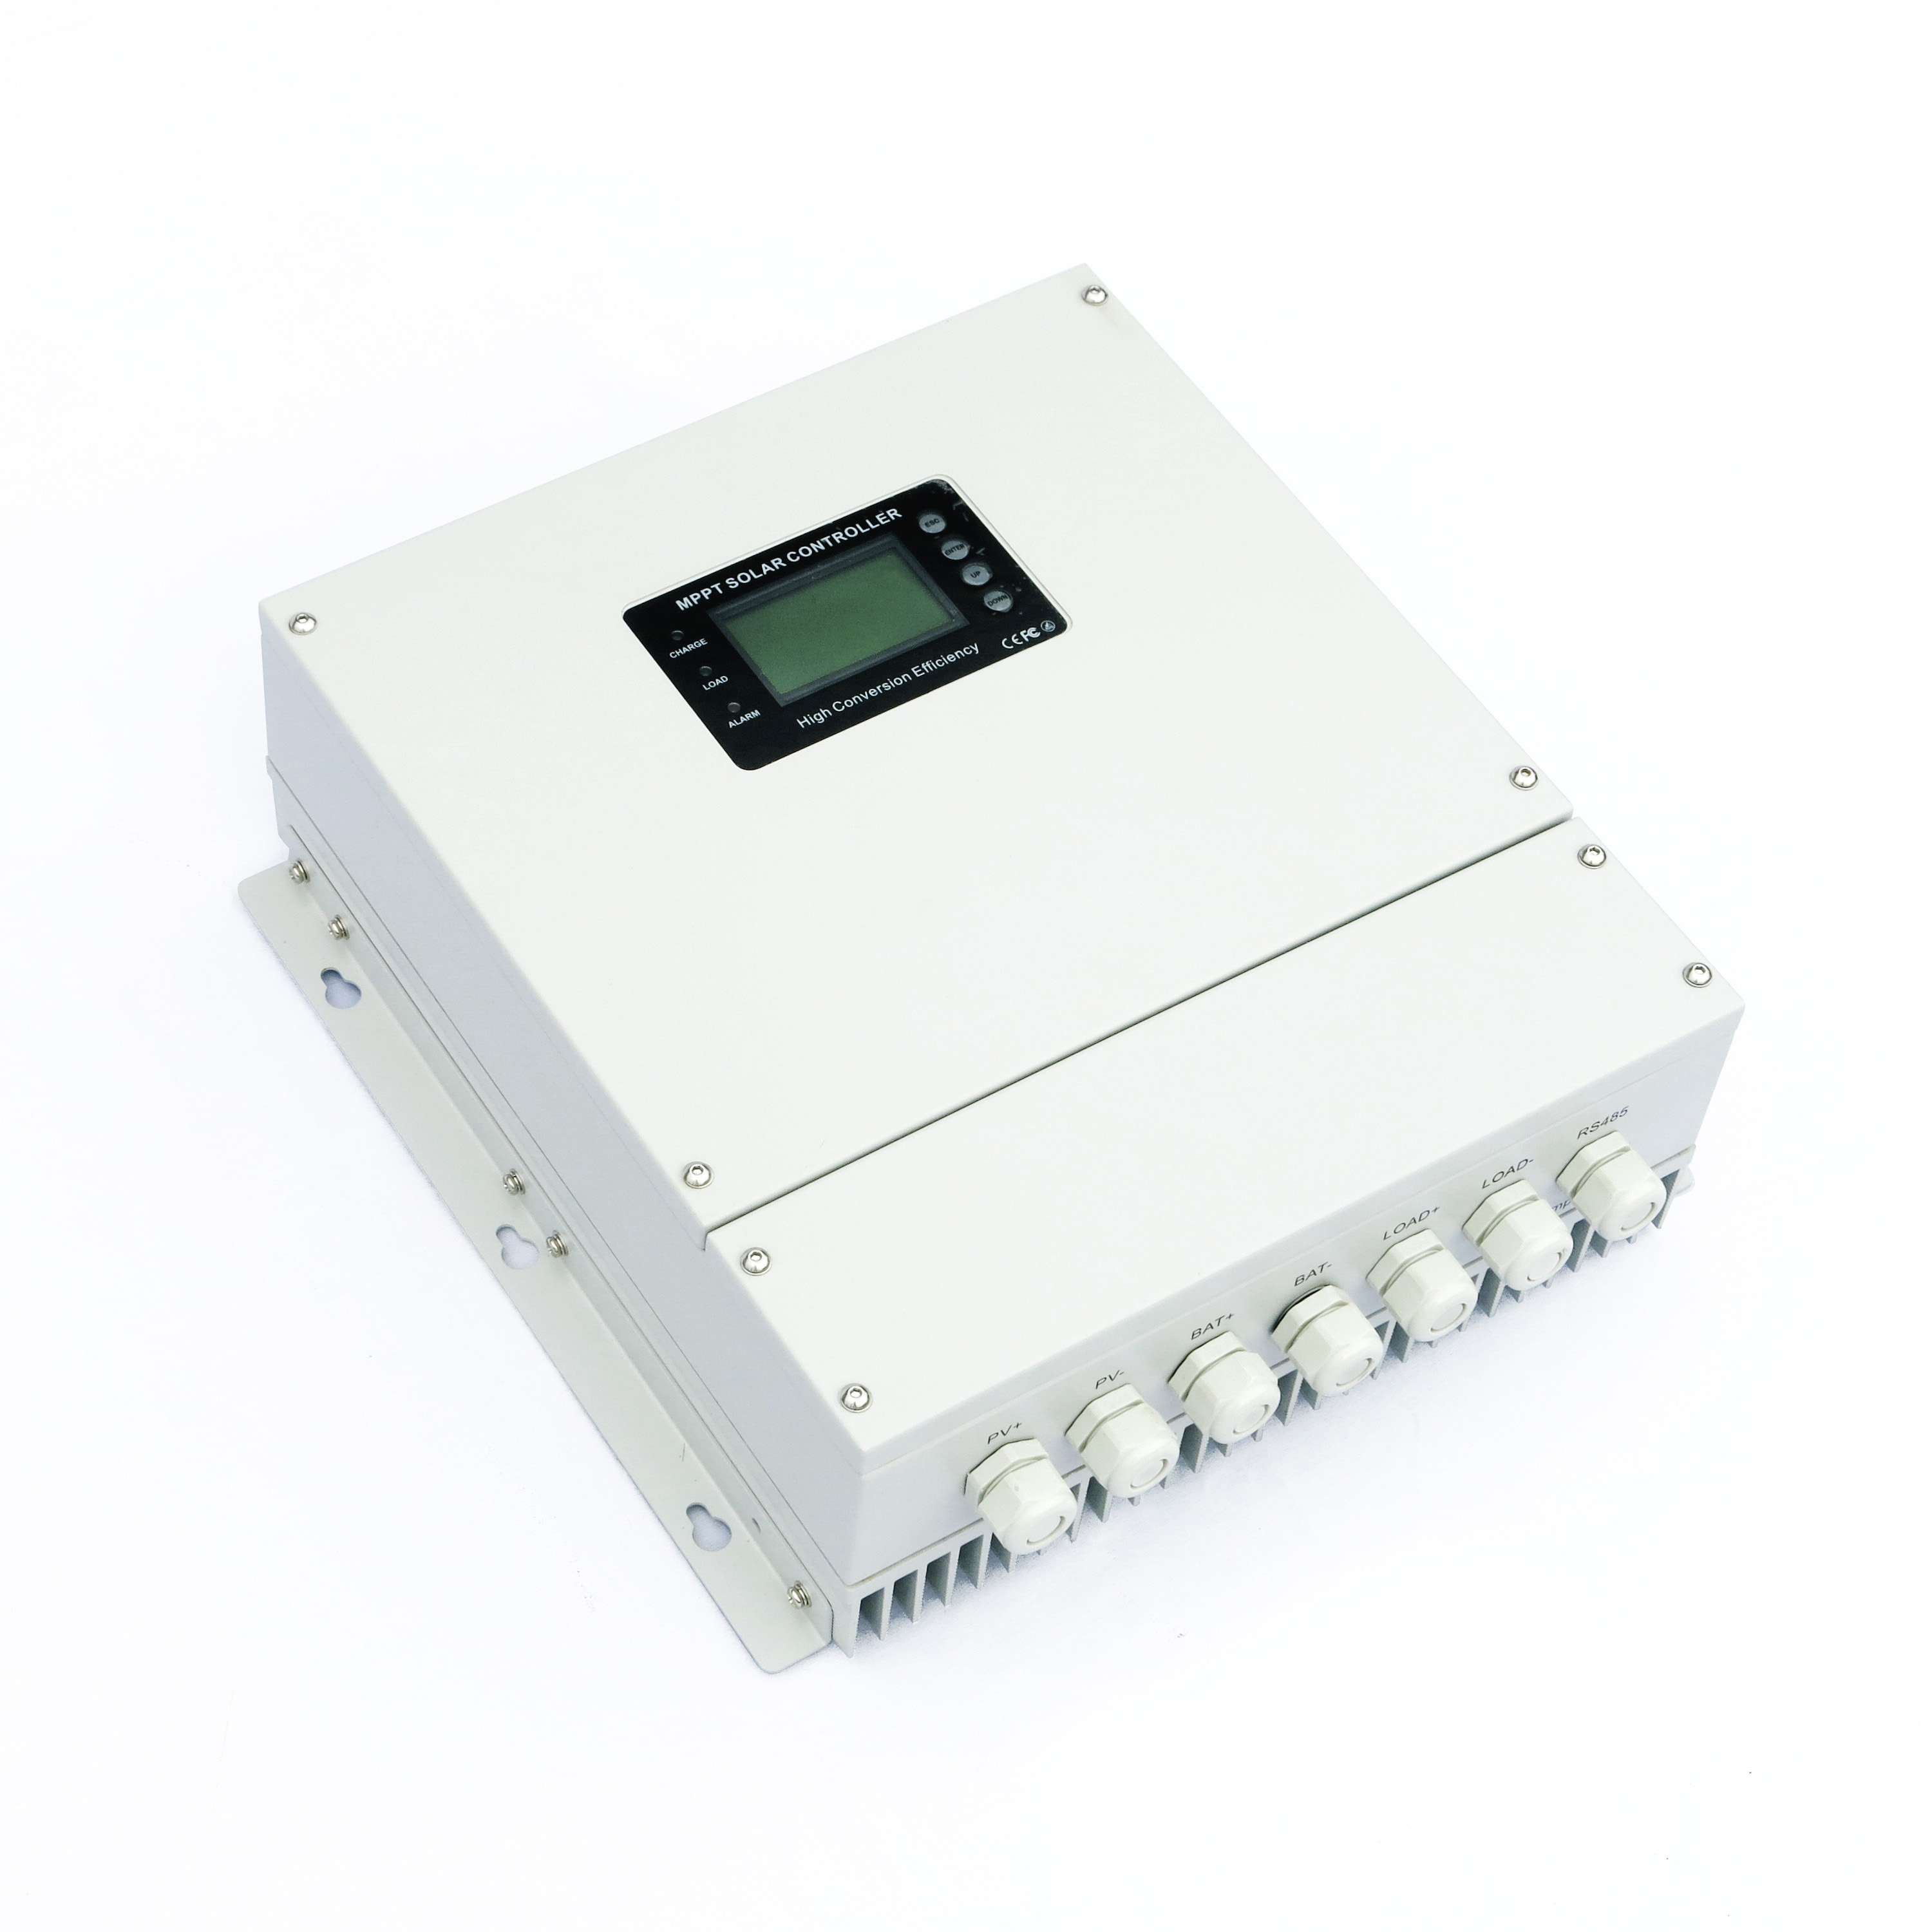 IPandee 80A 48V  Outdoor Telecom MPPT Solar Charge Controller for telecommunication base station